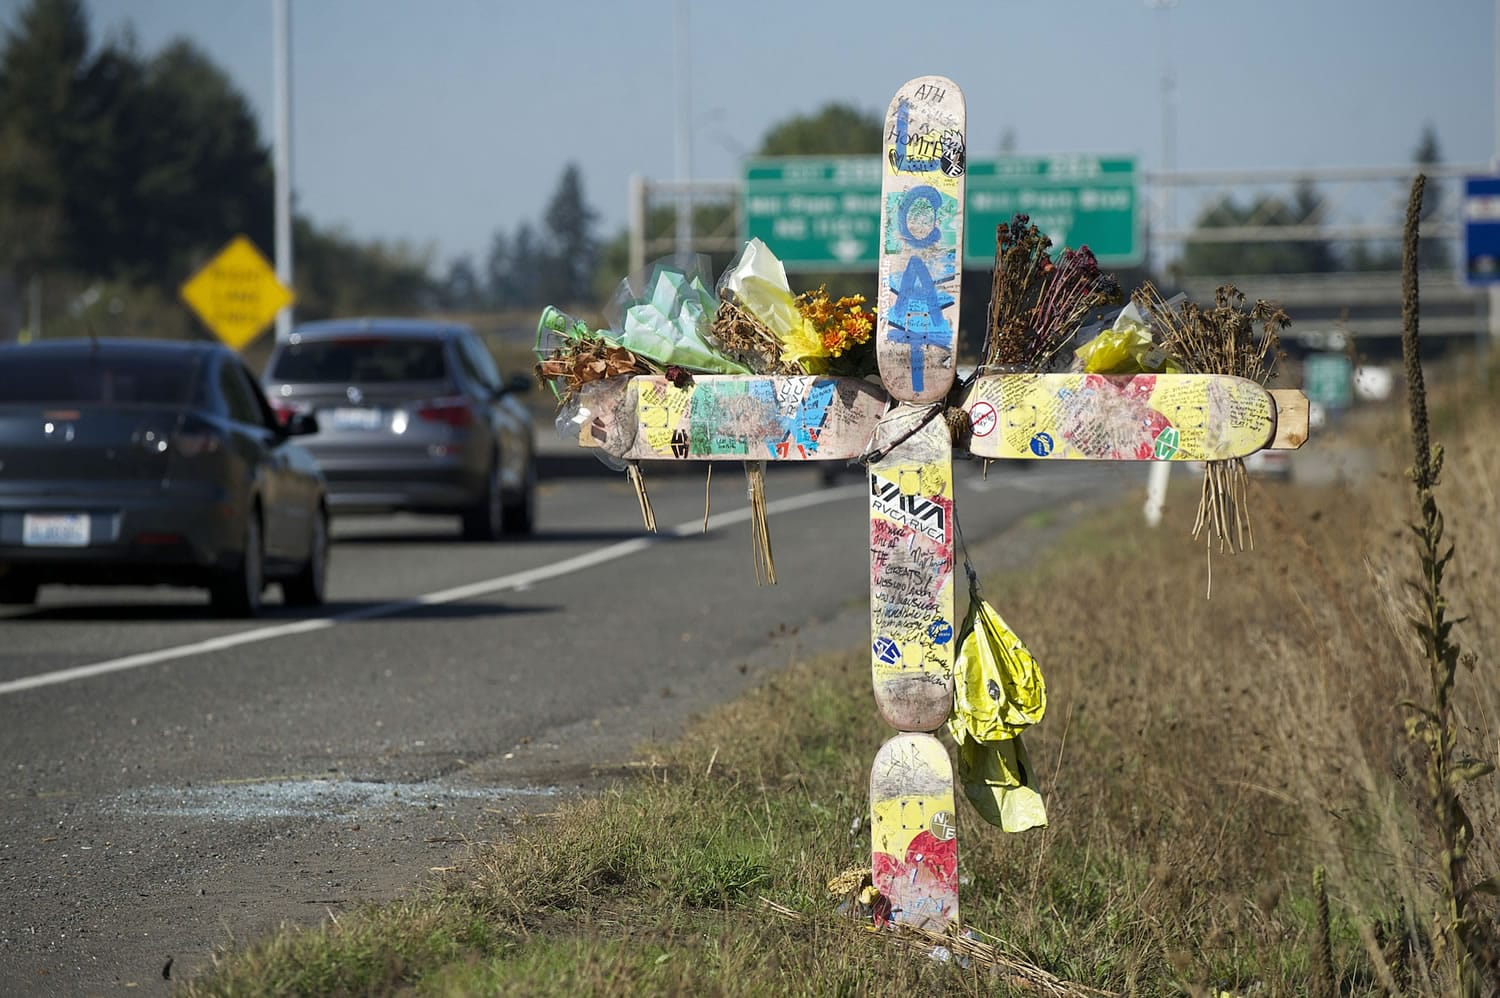 This is just the sort of roadside memorial that the Washington State Department of Transportation discourages.